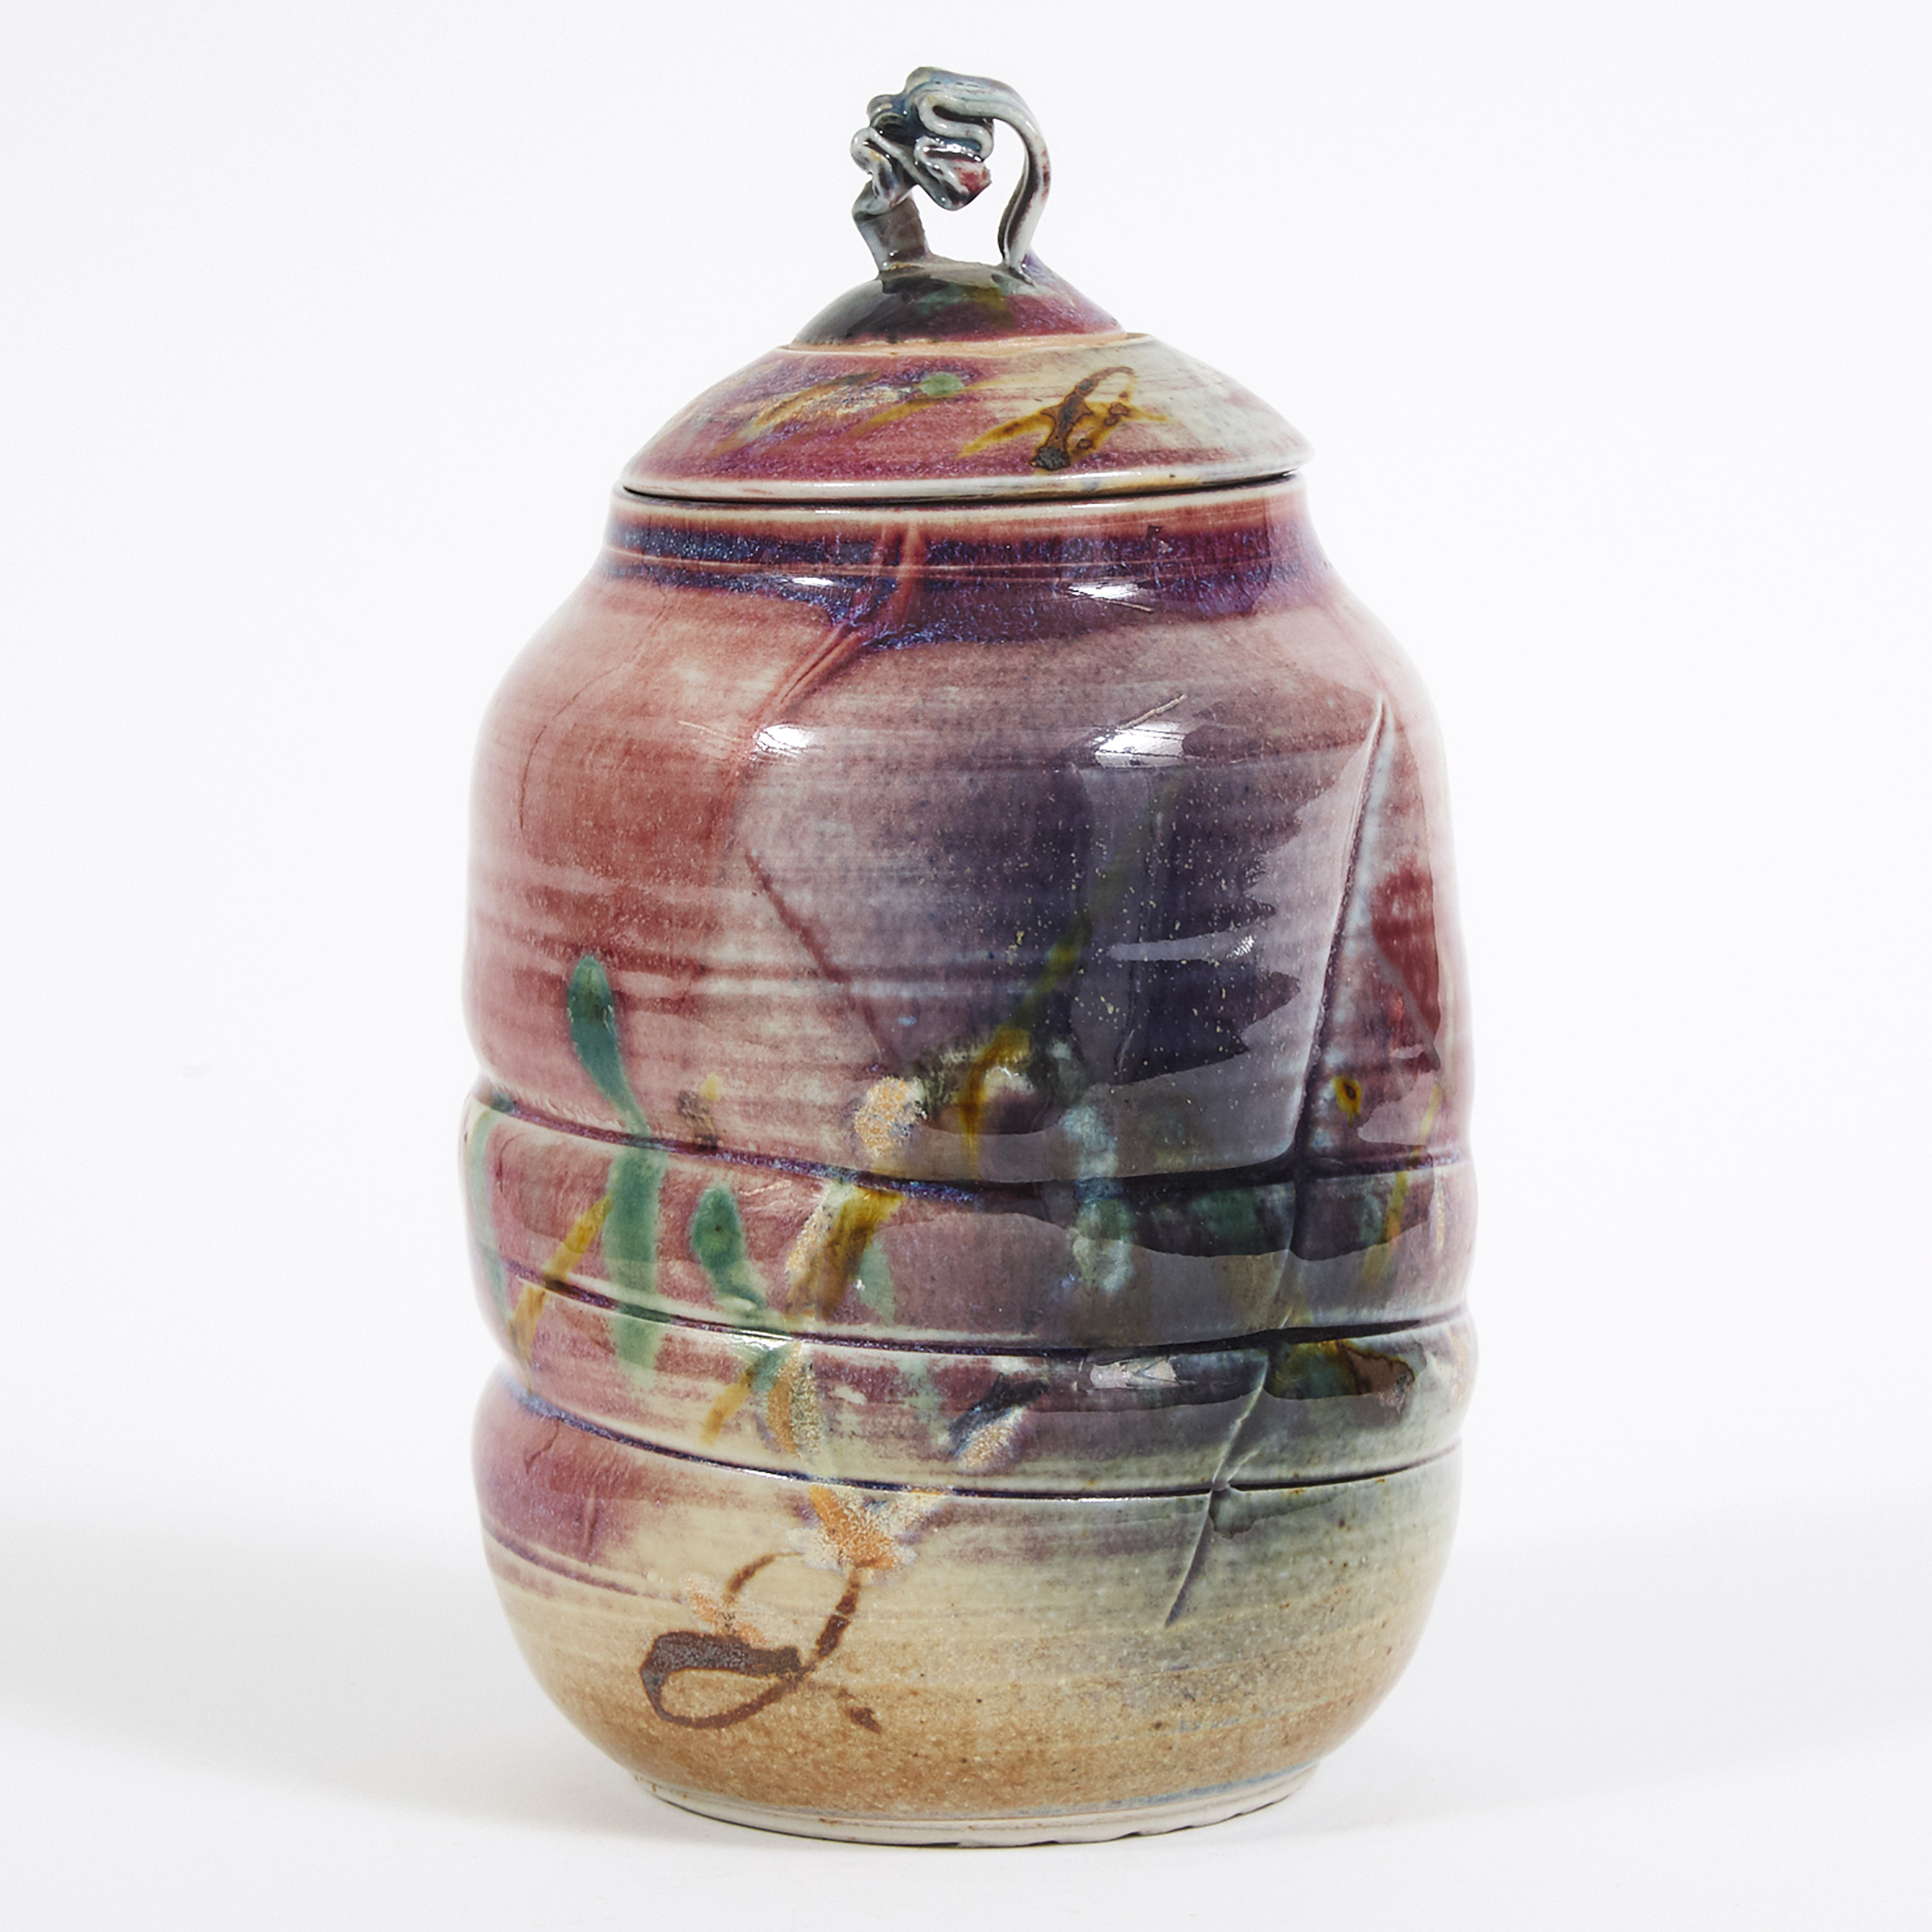 Kayo O'Young (Canadian, b.1950), Double Covered Jar, 1993